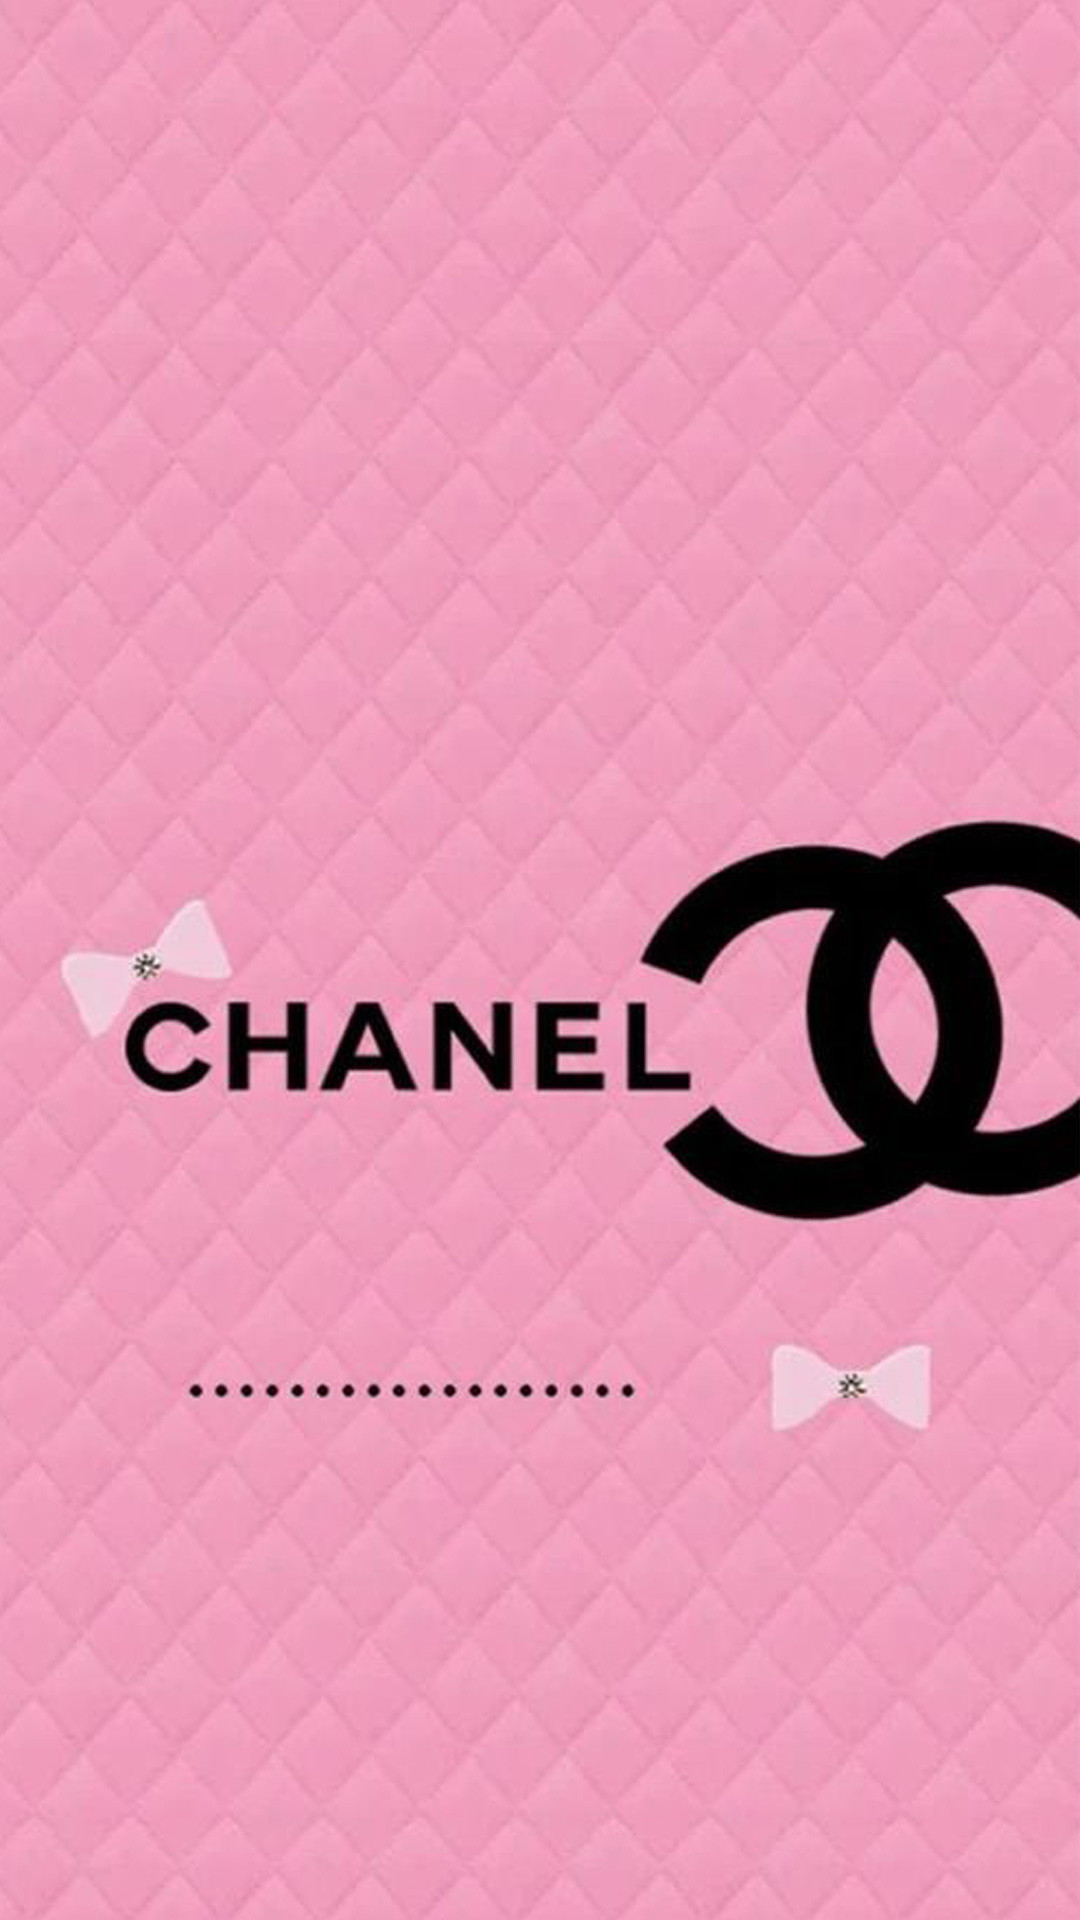 1080x1920 wallpaper.wiki-HD-Chanel-images-iphone-PIC-WPC007232